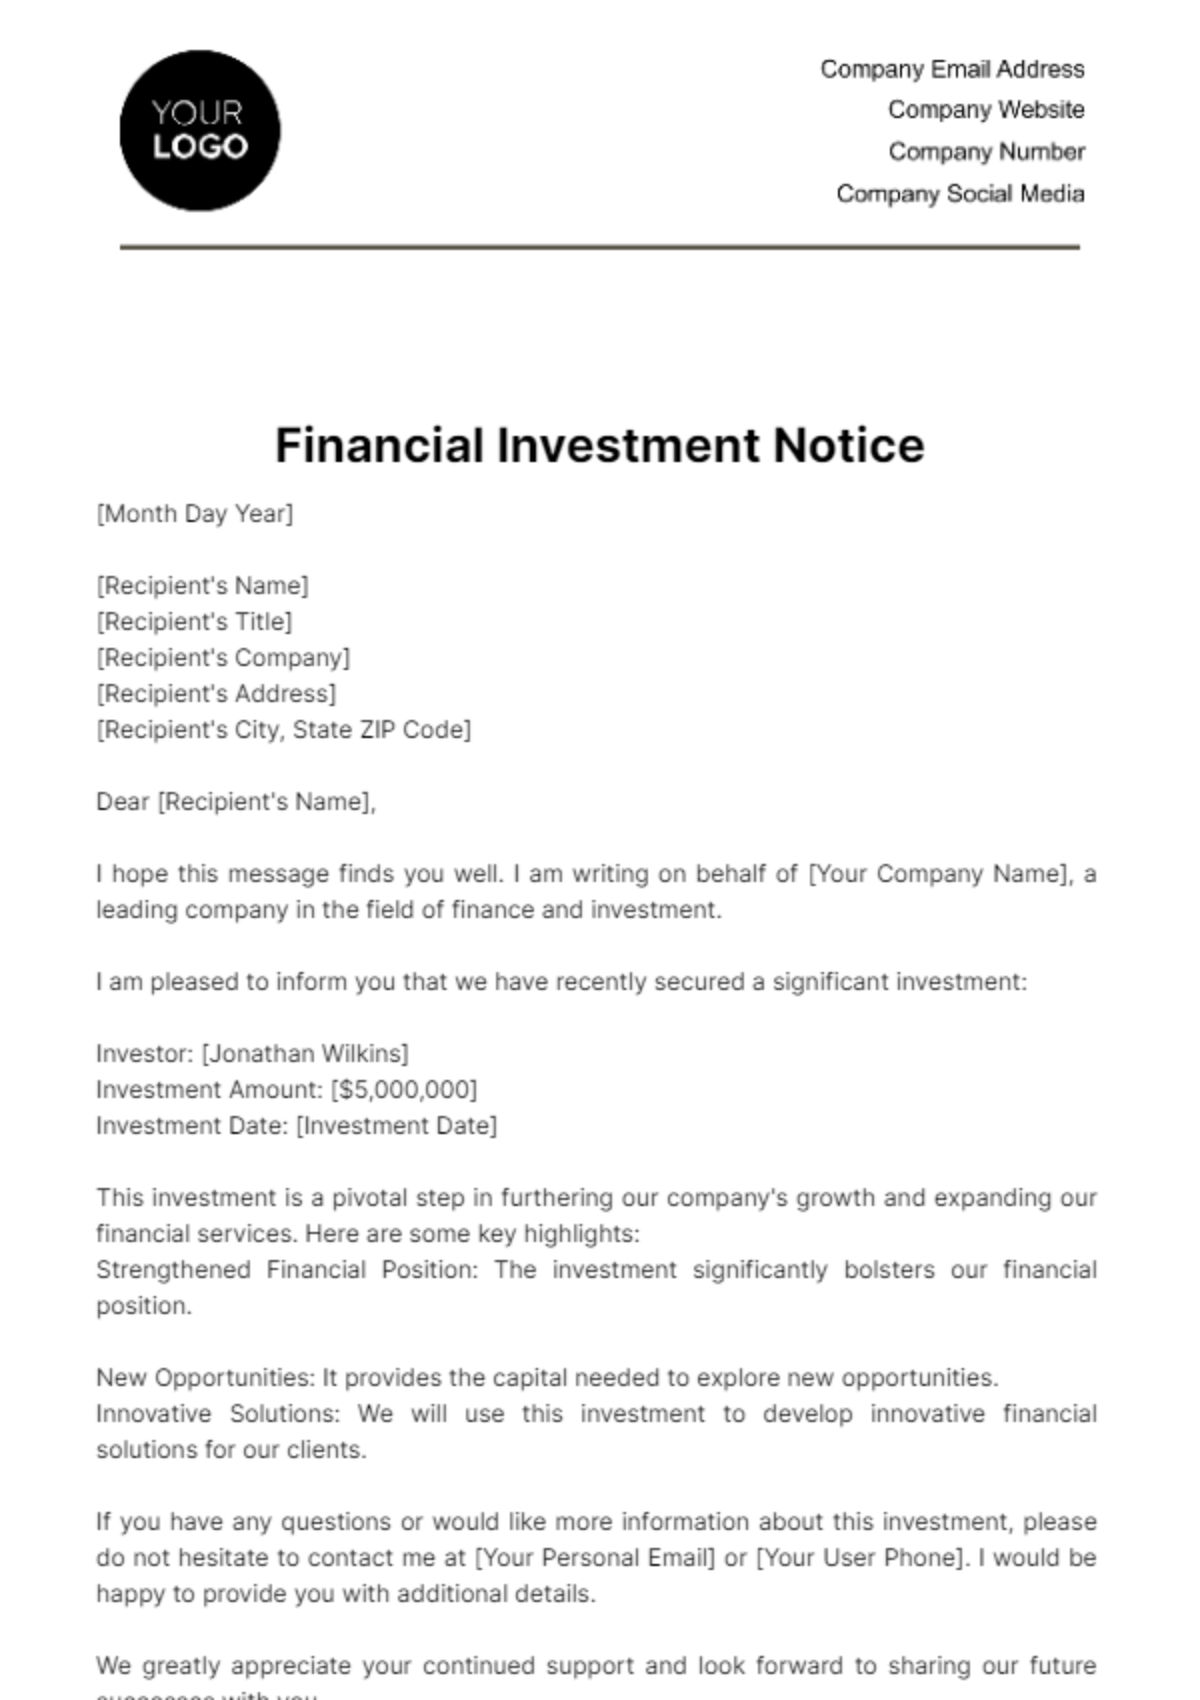 Financial Investment Notice Template